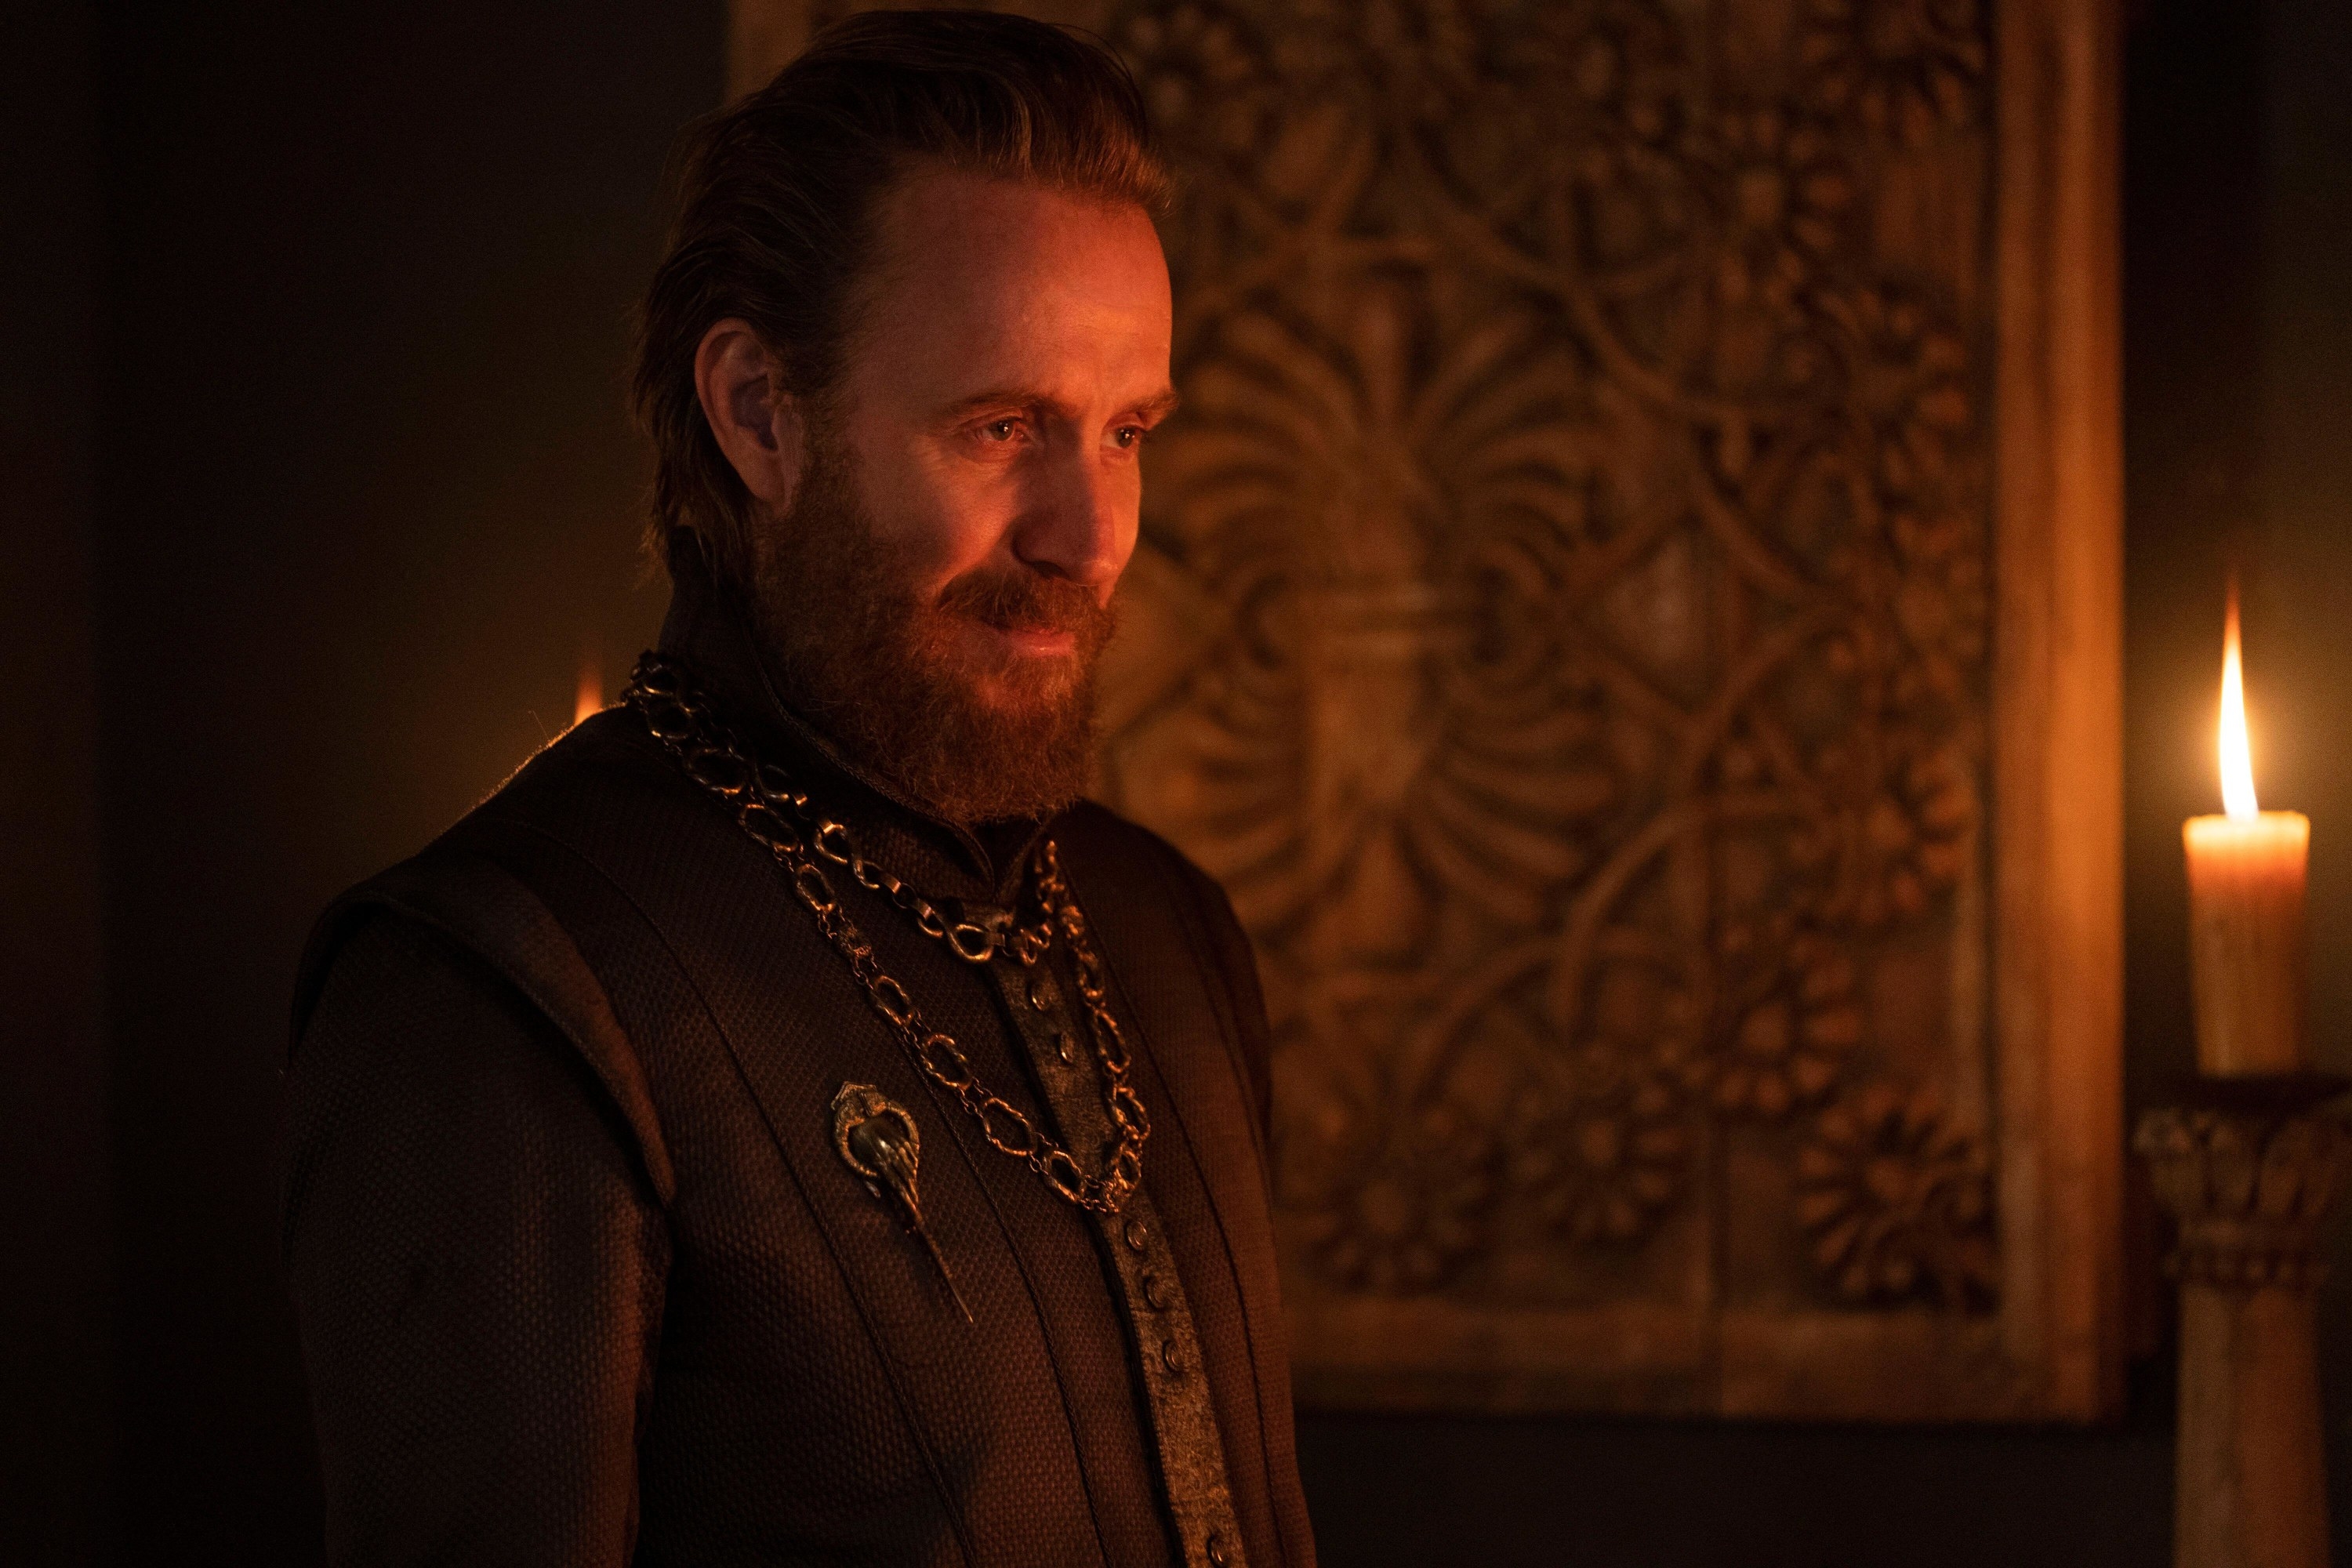 A bearded man in sleek clothing grins deceptively by candlelight